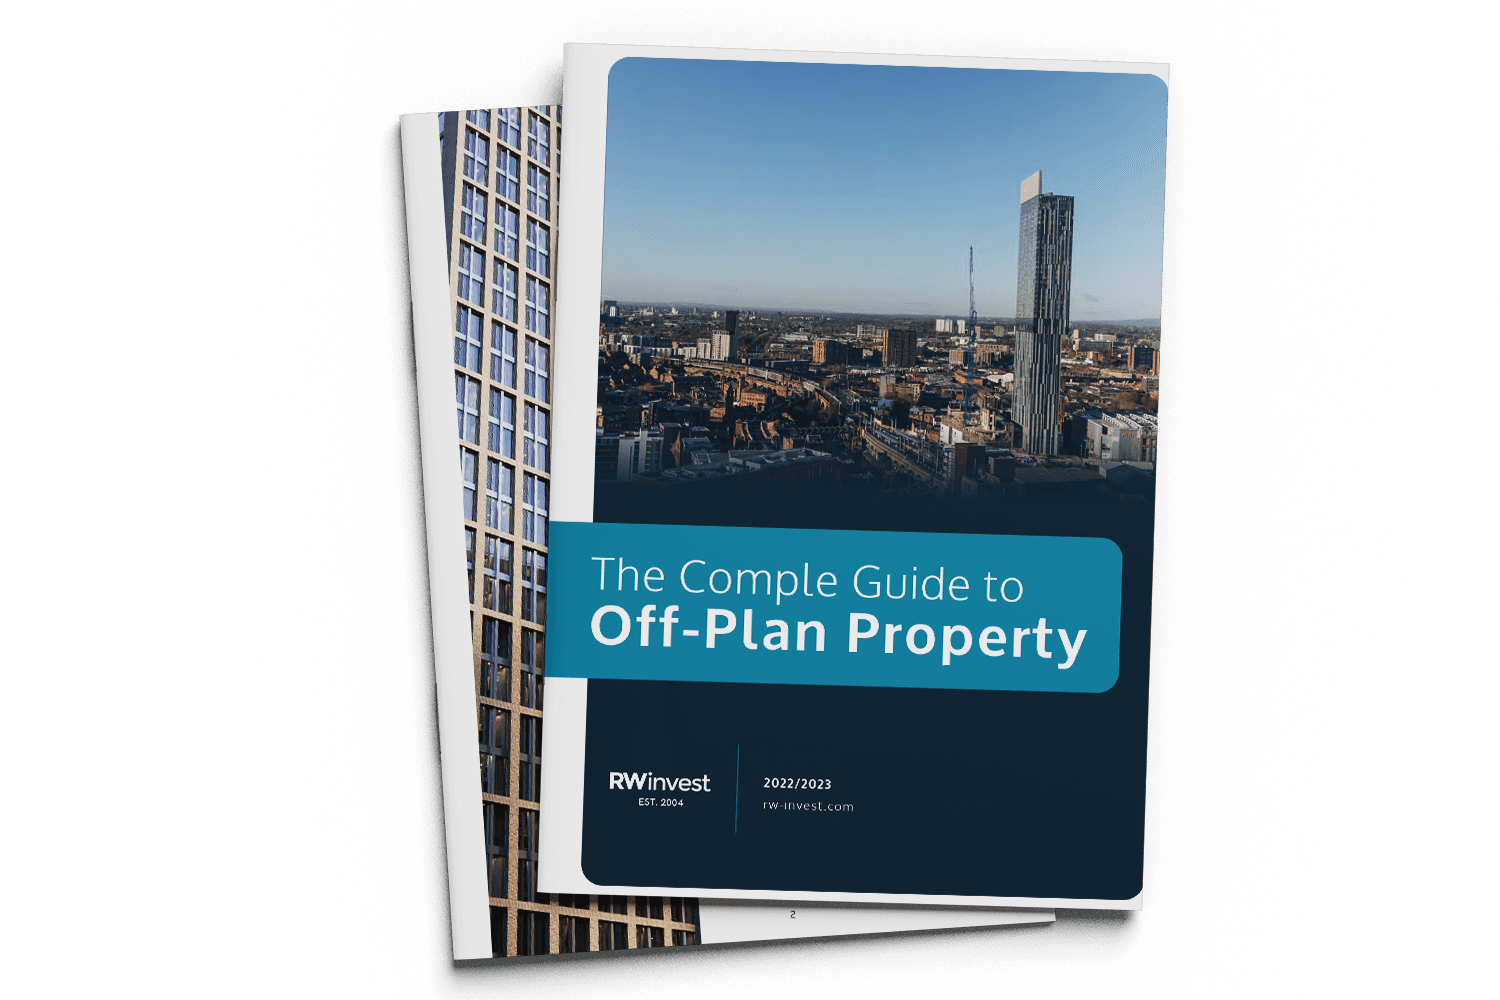 Featured off-plan property investment guide